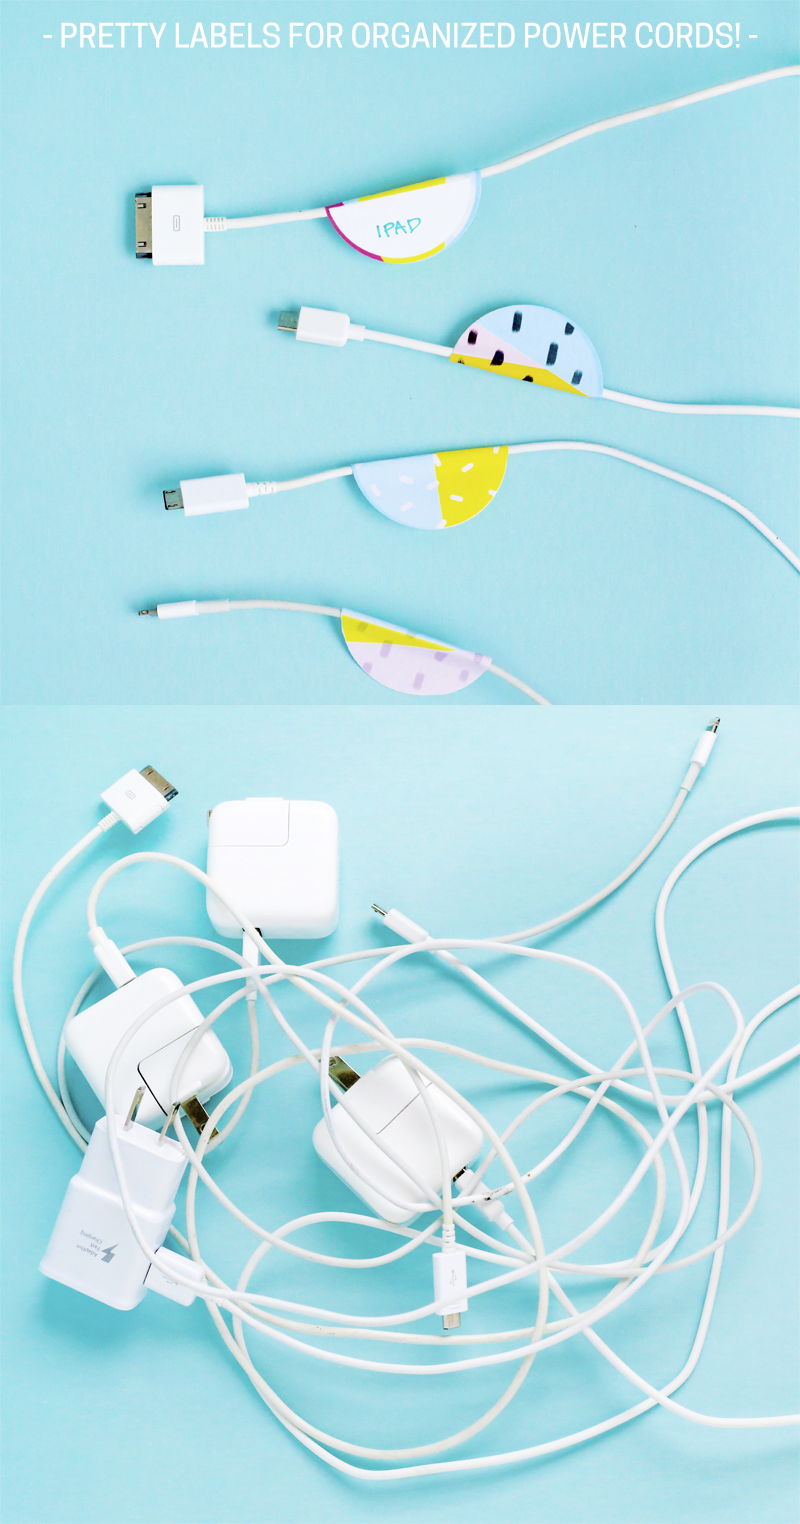 Pretty Labels to Organize Power Cords!